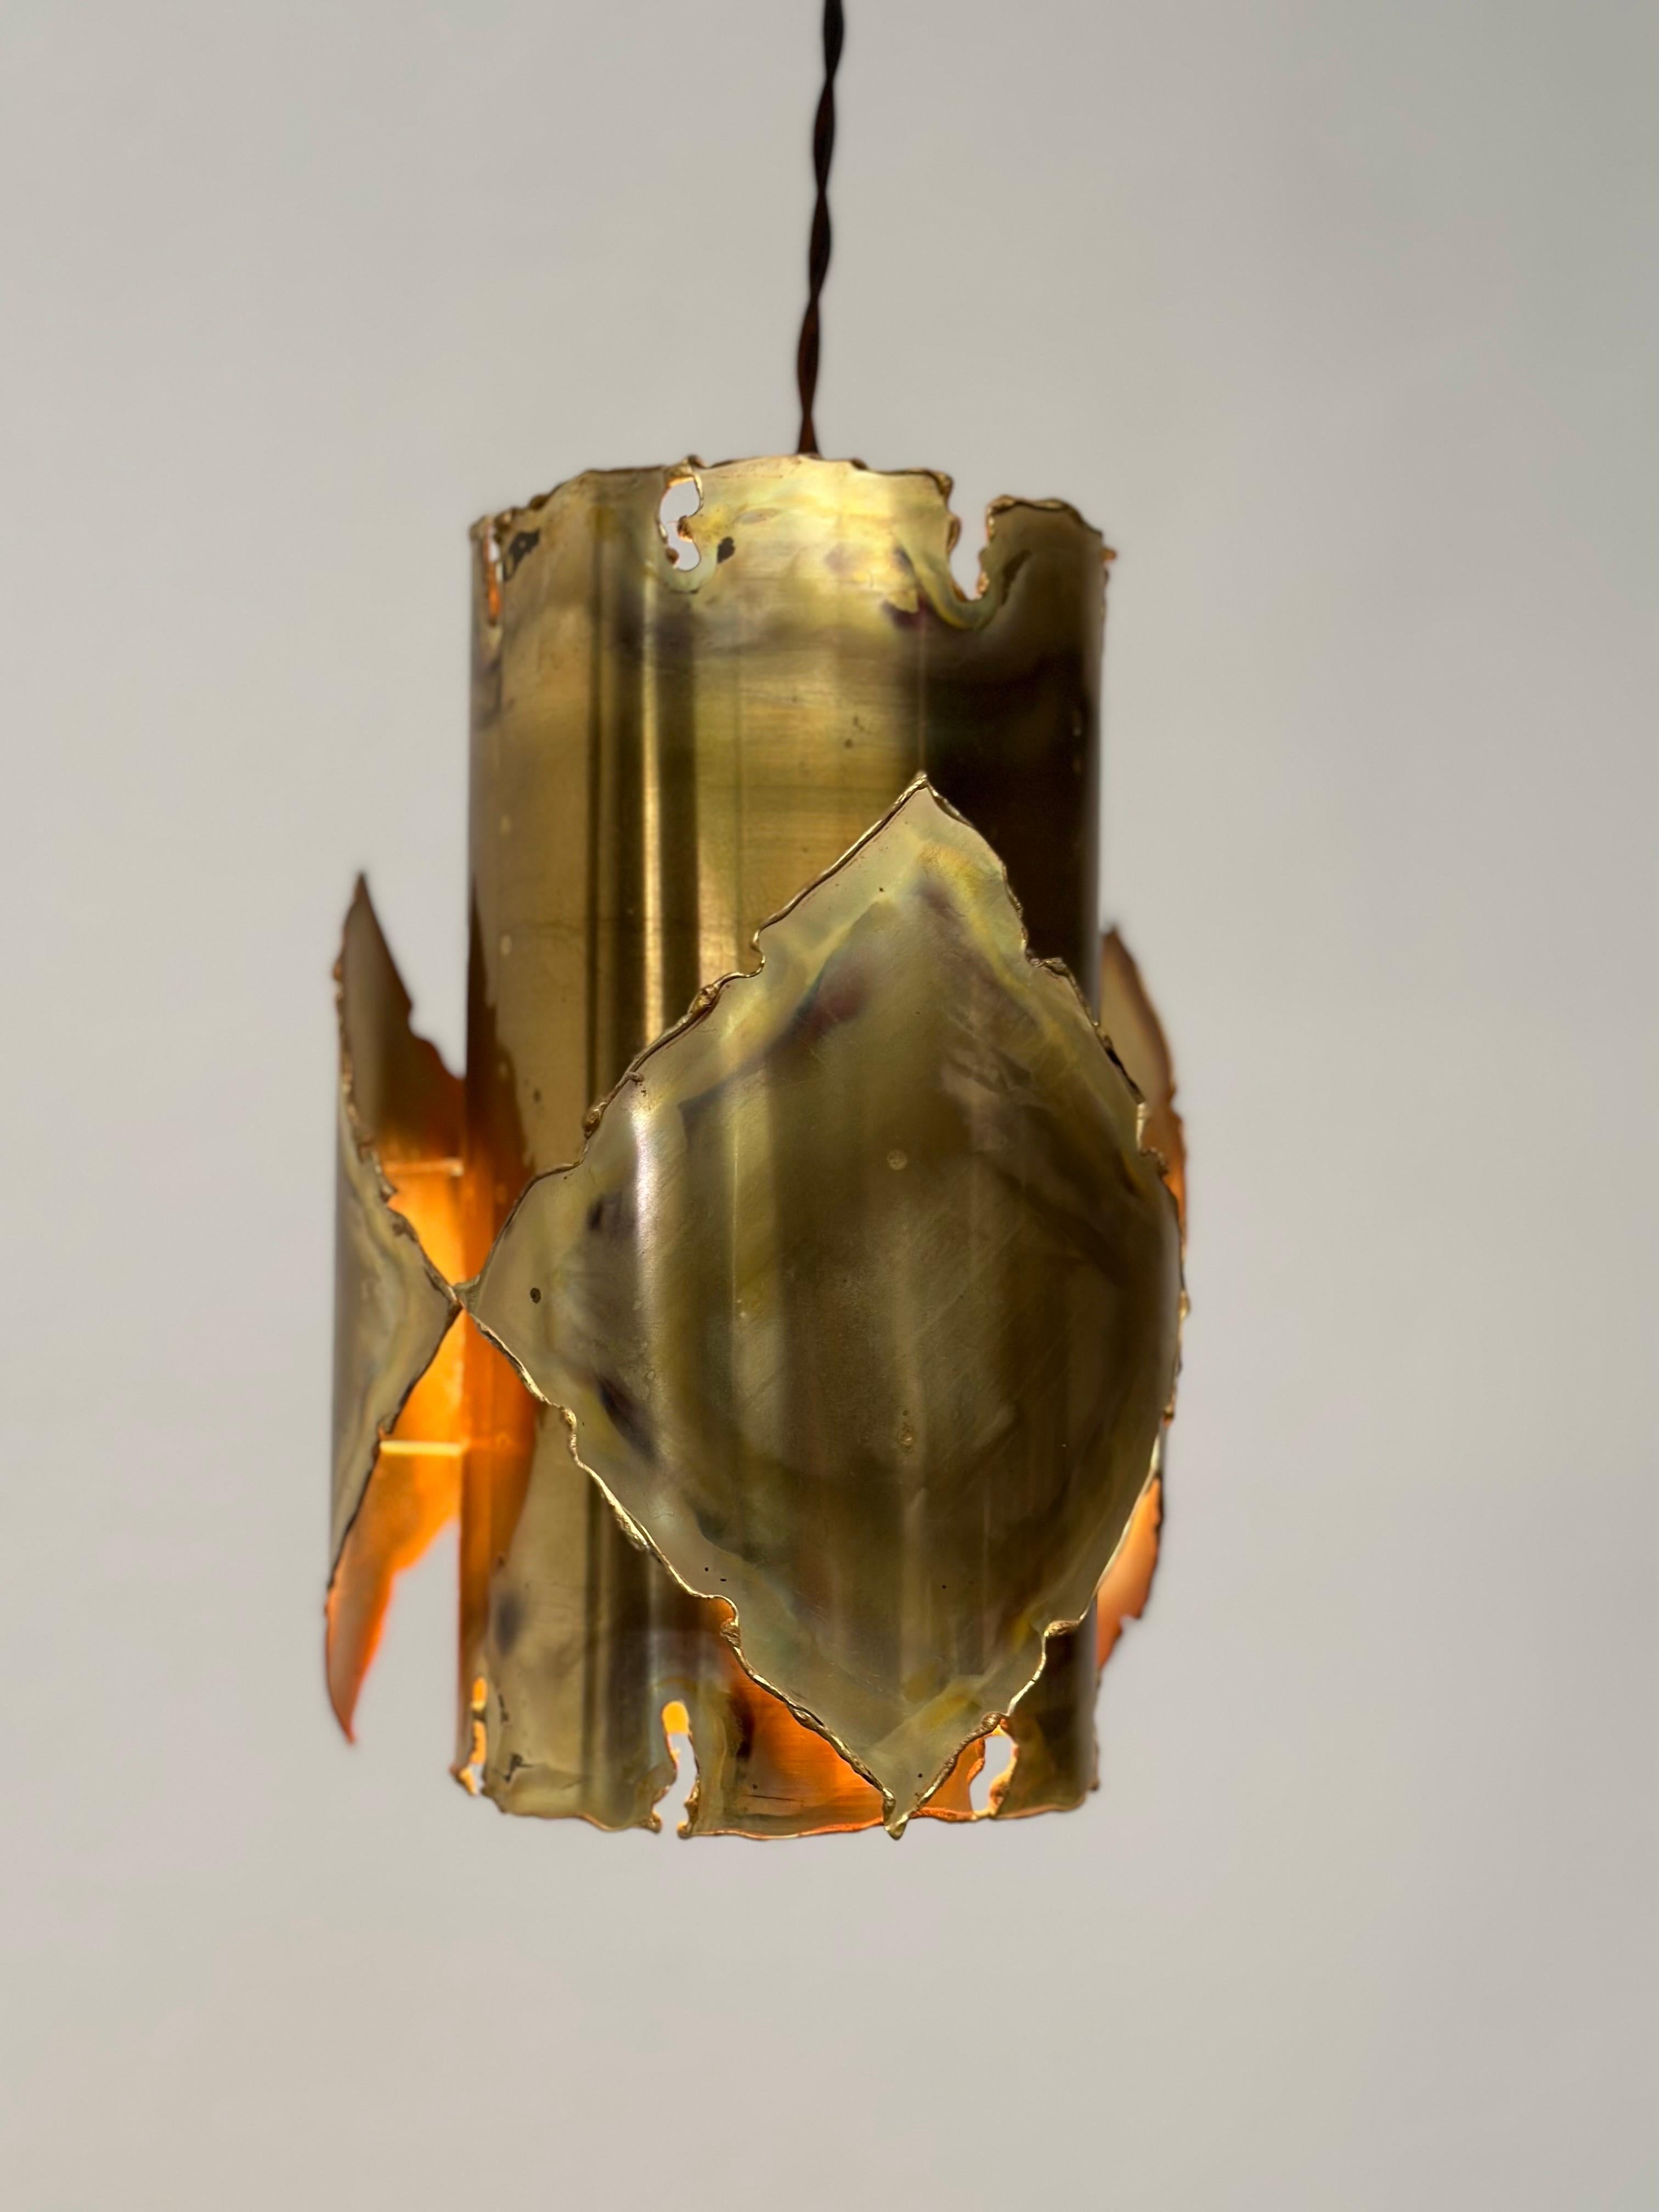 Exquisite Ceiling Brass Brutalist Lamp by Sven Aage Jensen for Holm Sørensen (1960s)

Discover the essence of mid-century modern elegance with this remarkable Ceiling Brass Brutalist Lamp, a captivating creation by the esteemed designer Sven Aage